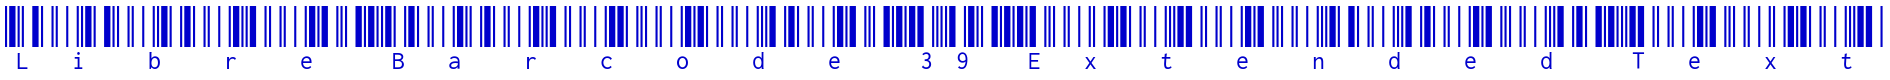 Libre Barcode 39 Extended Text шрифт